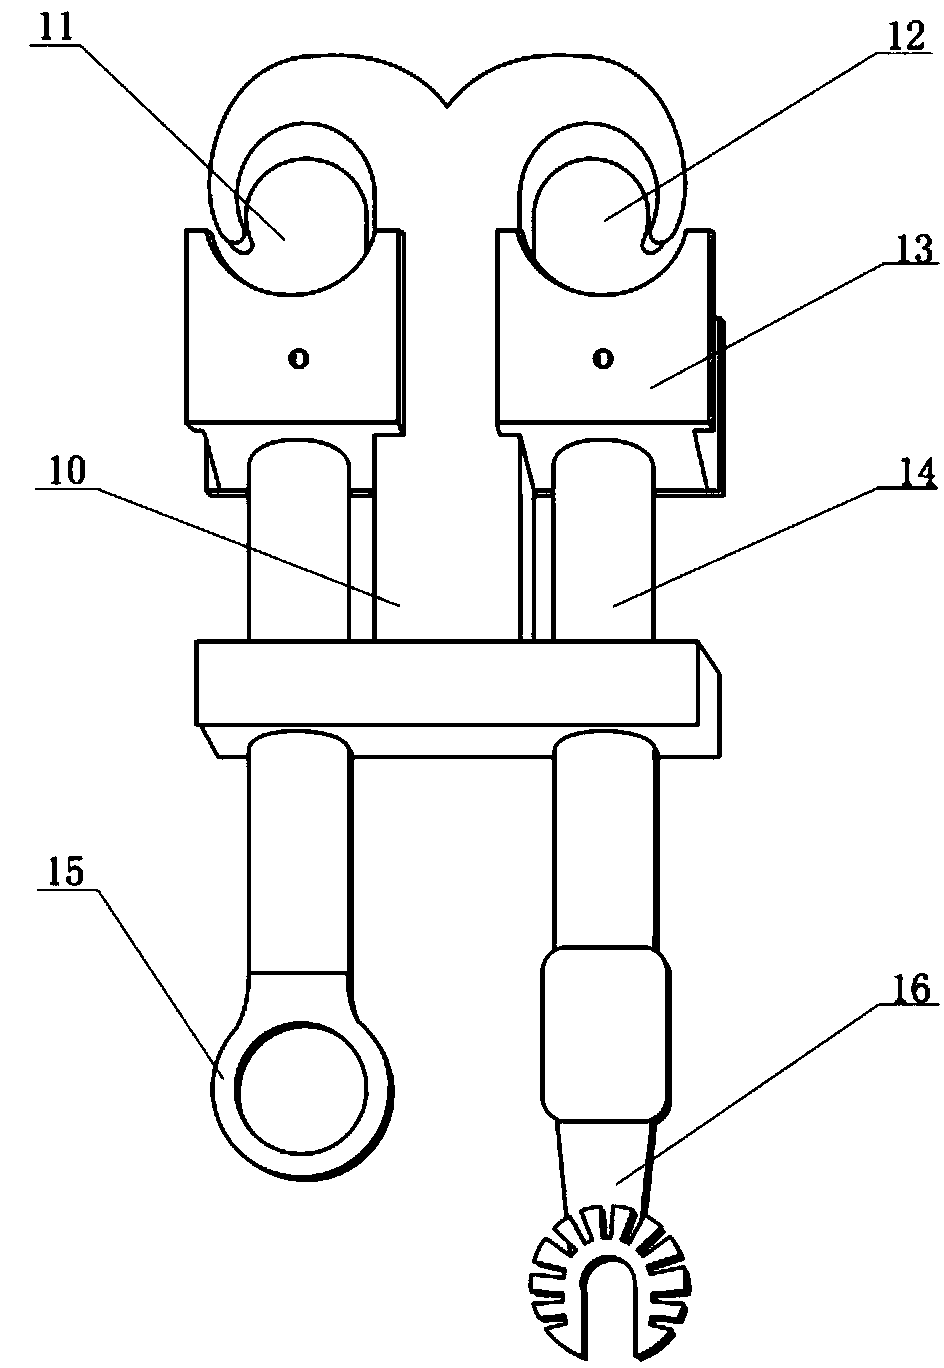 Method and device for 10 kV electrified work for connecting lead of branch connecting circuit